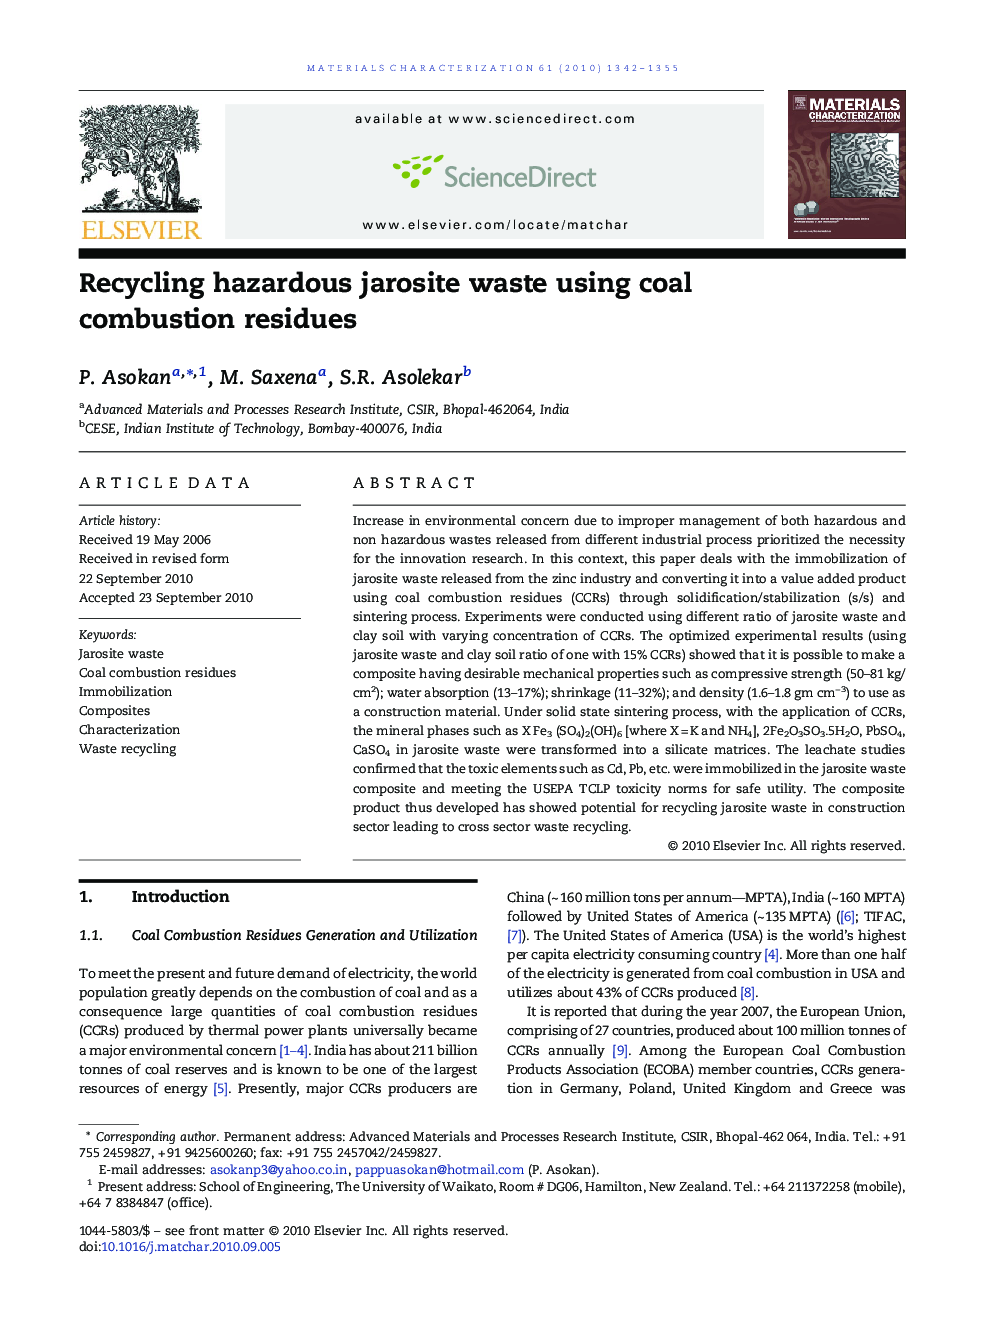 Recycling hazardous jarosite waste using coal combustion residues